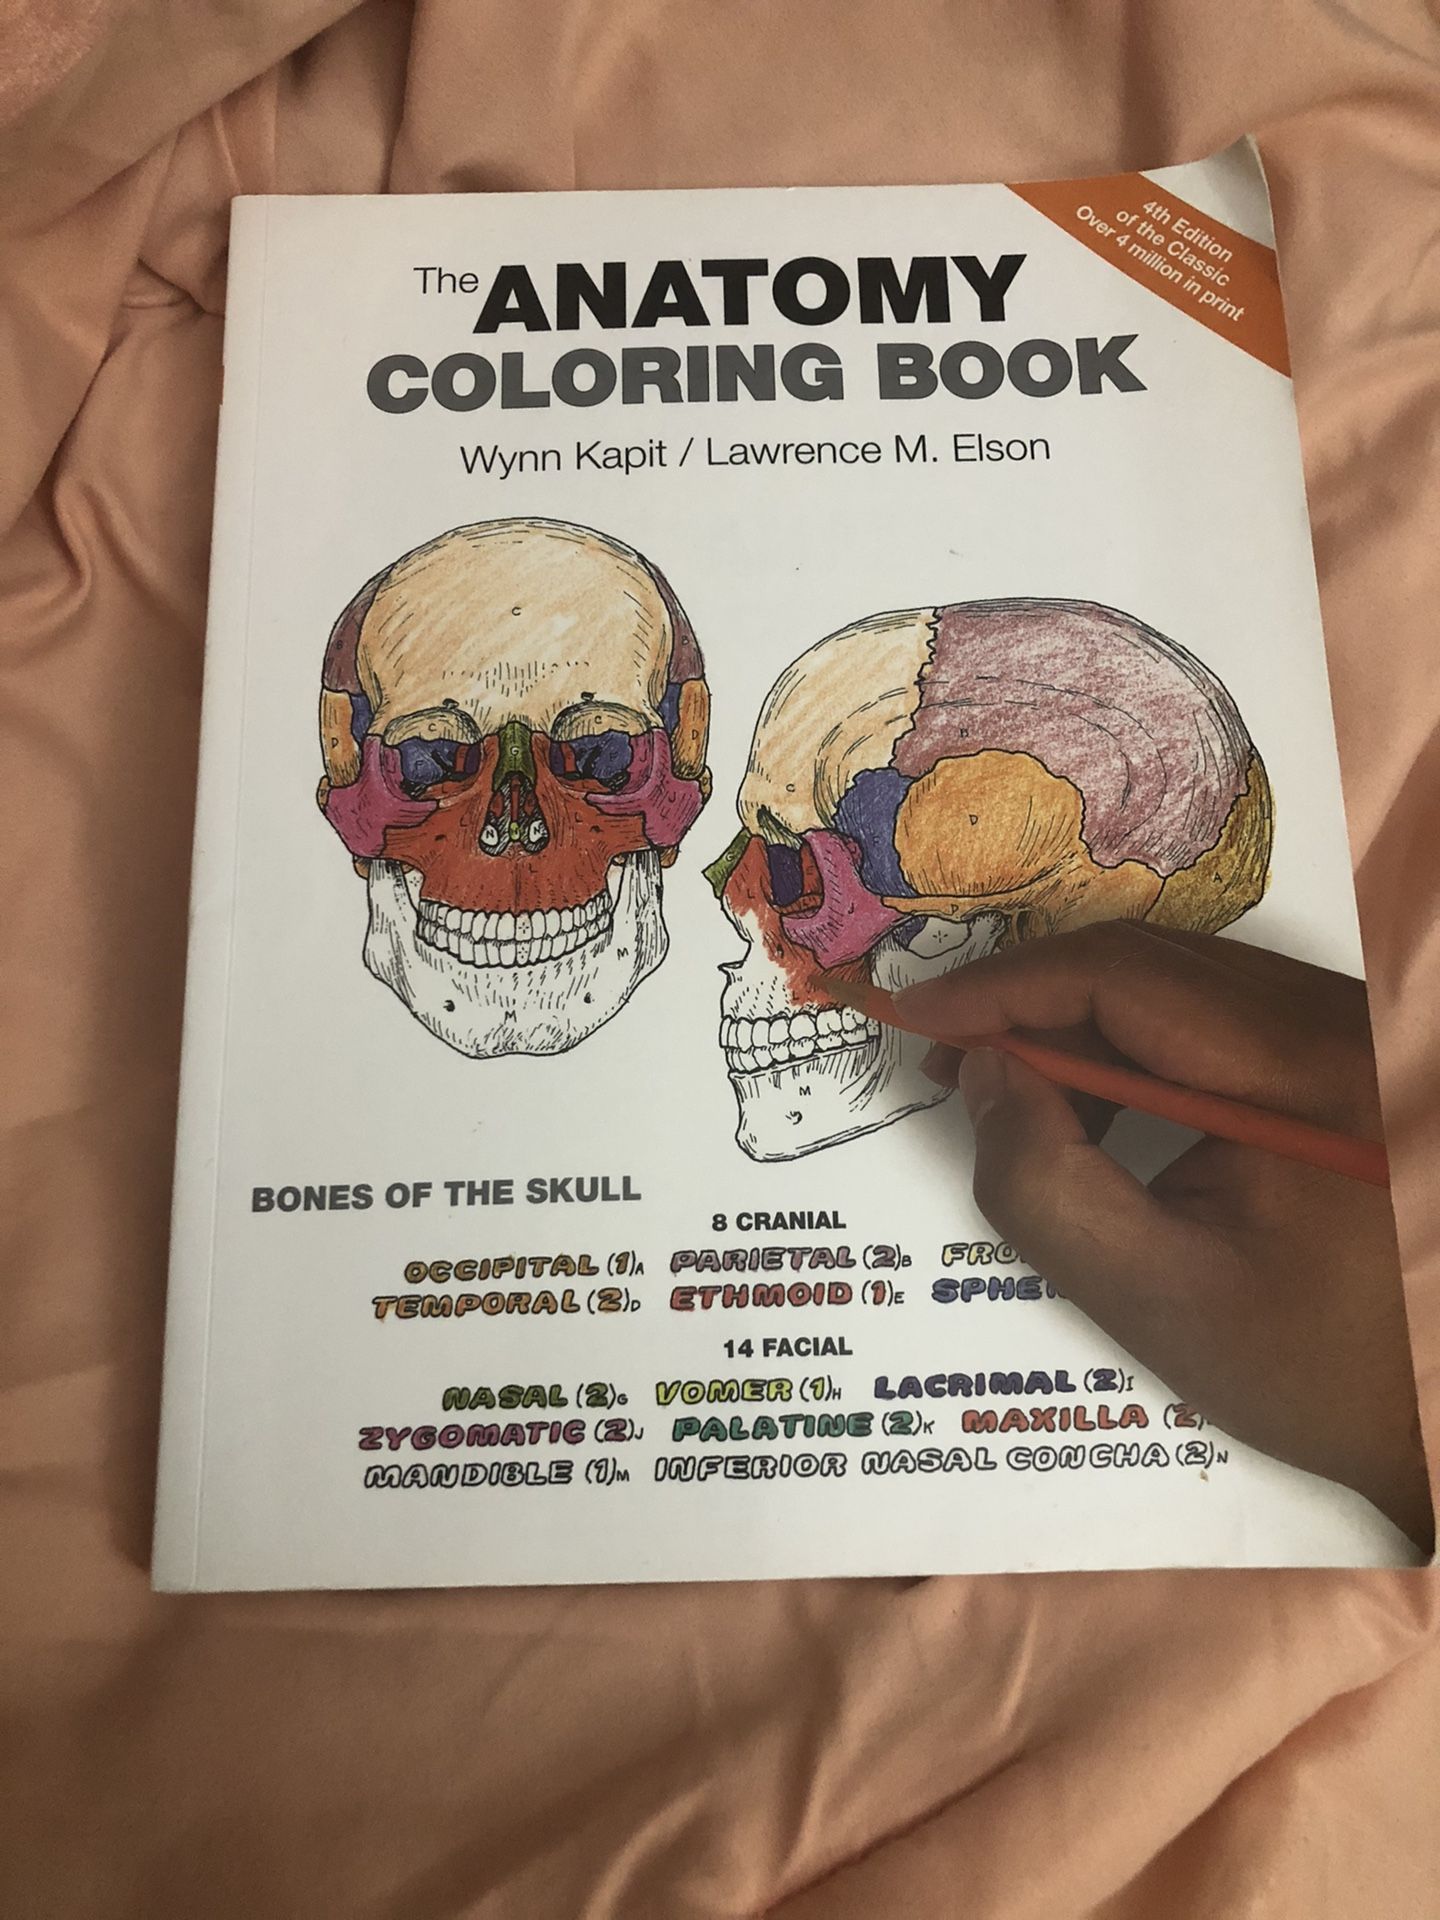 Anatomy coloring book $8